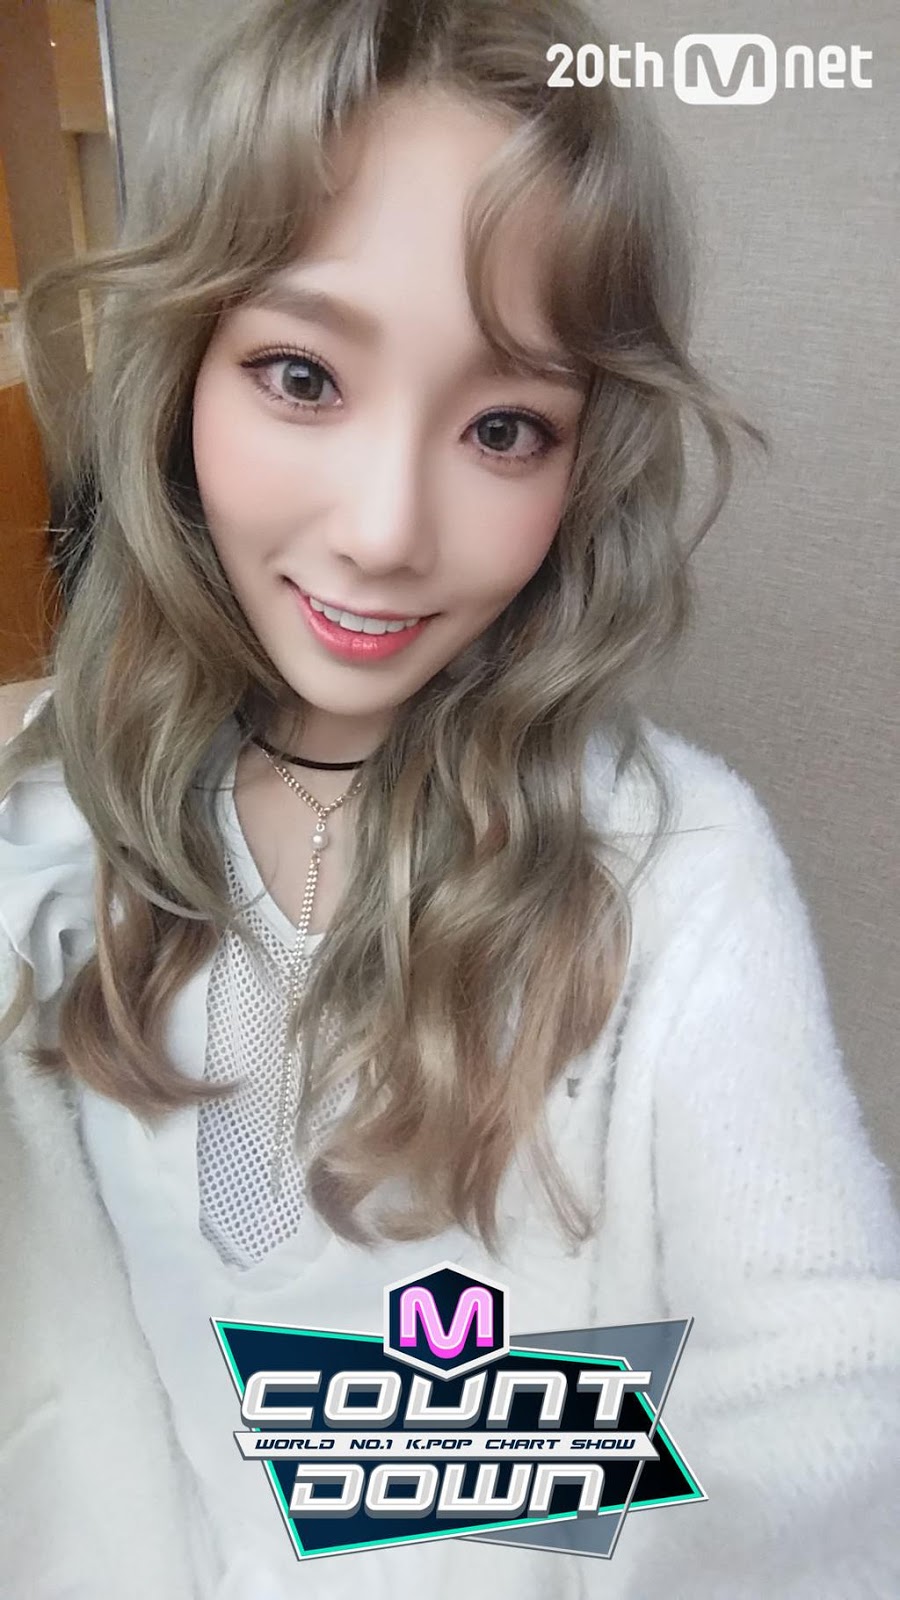 Check out SNSD TaeYeon's backstage pictures from M Countdown ...